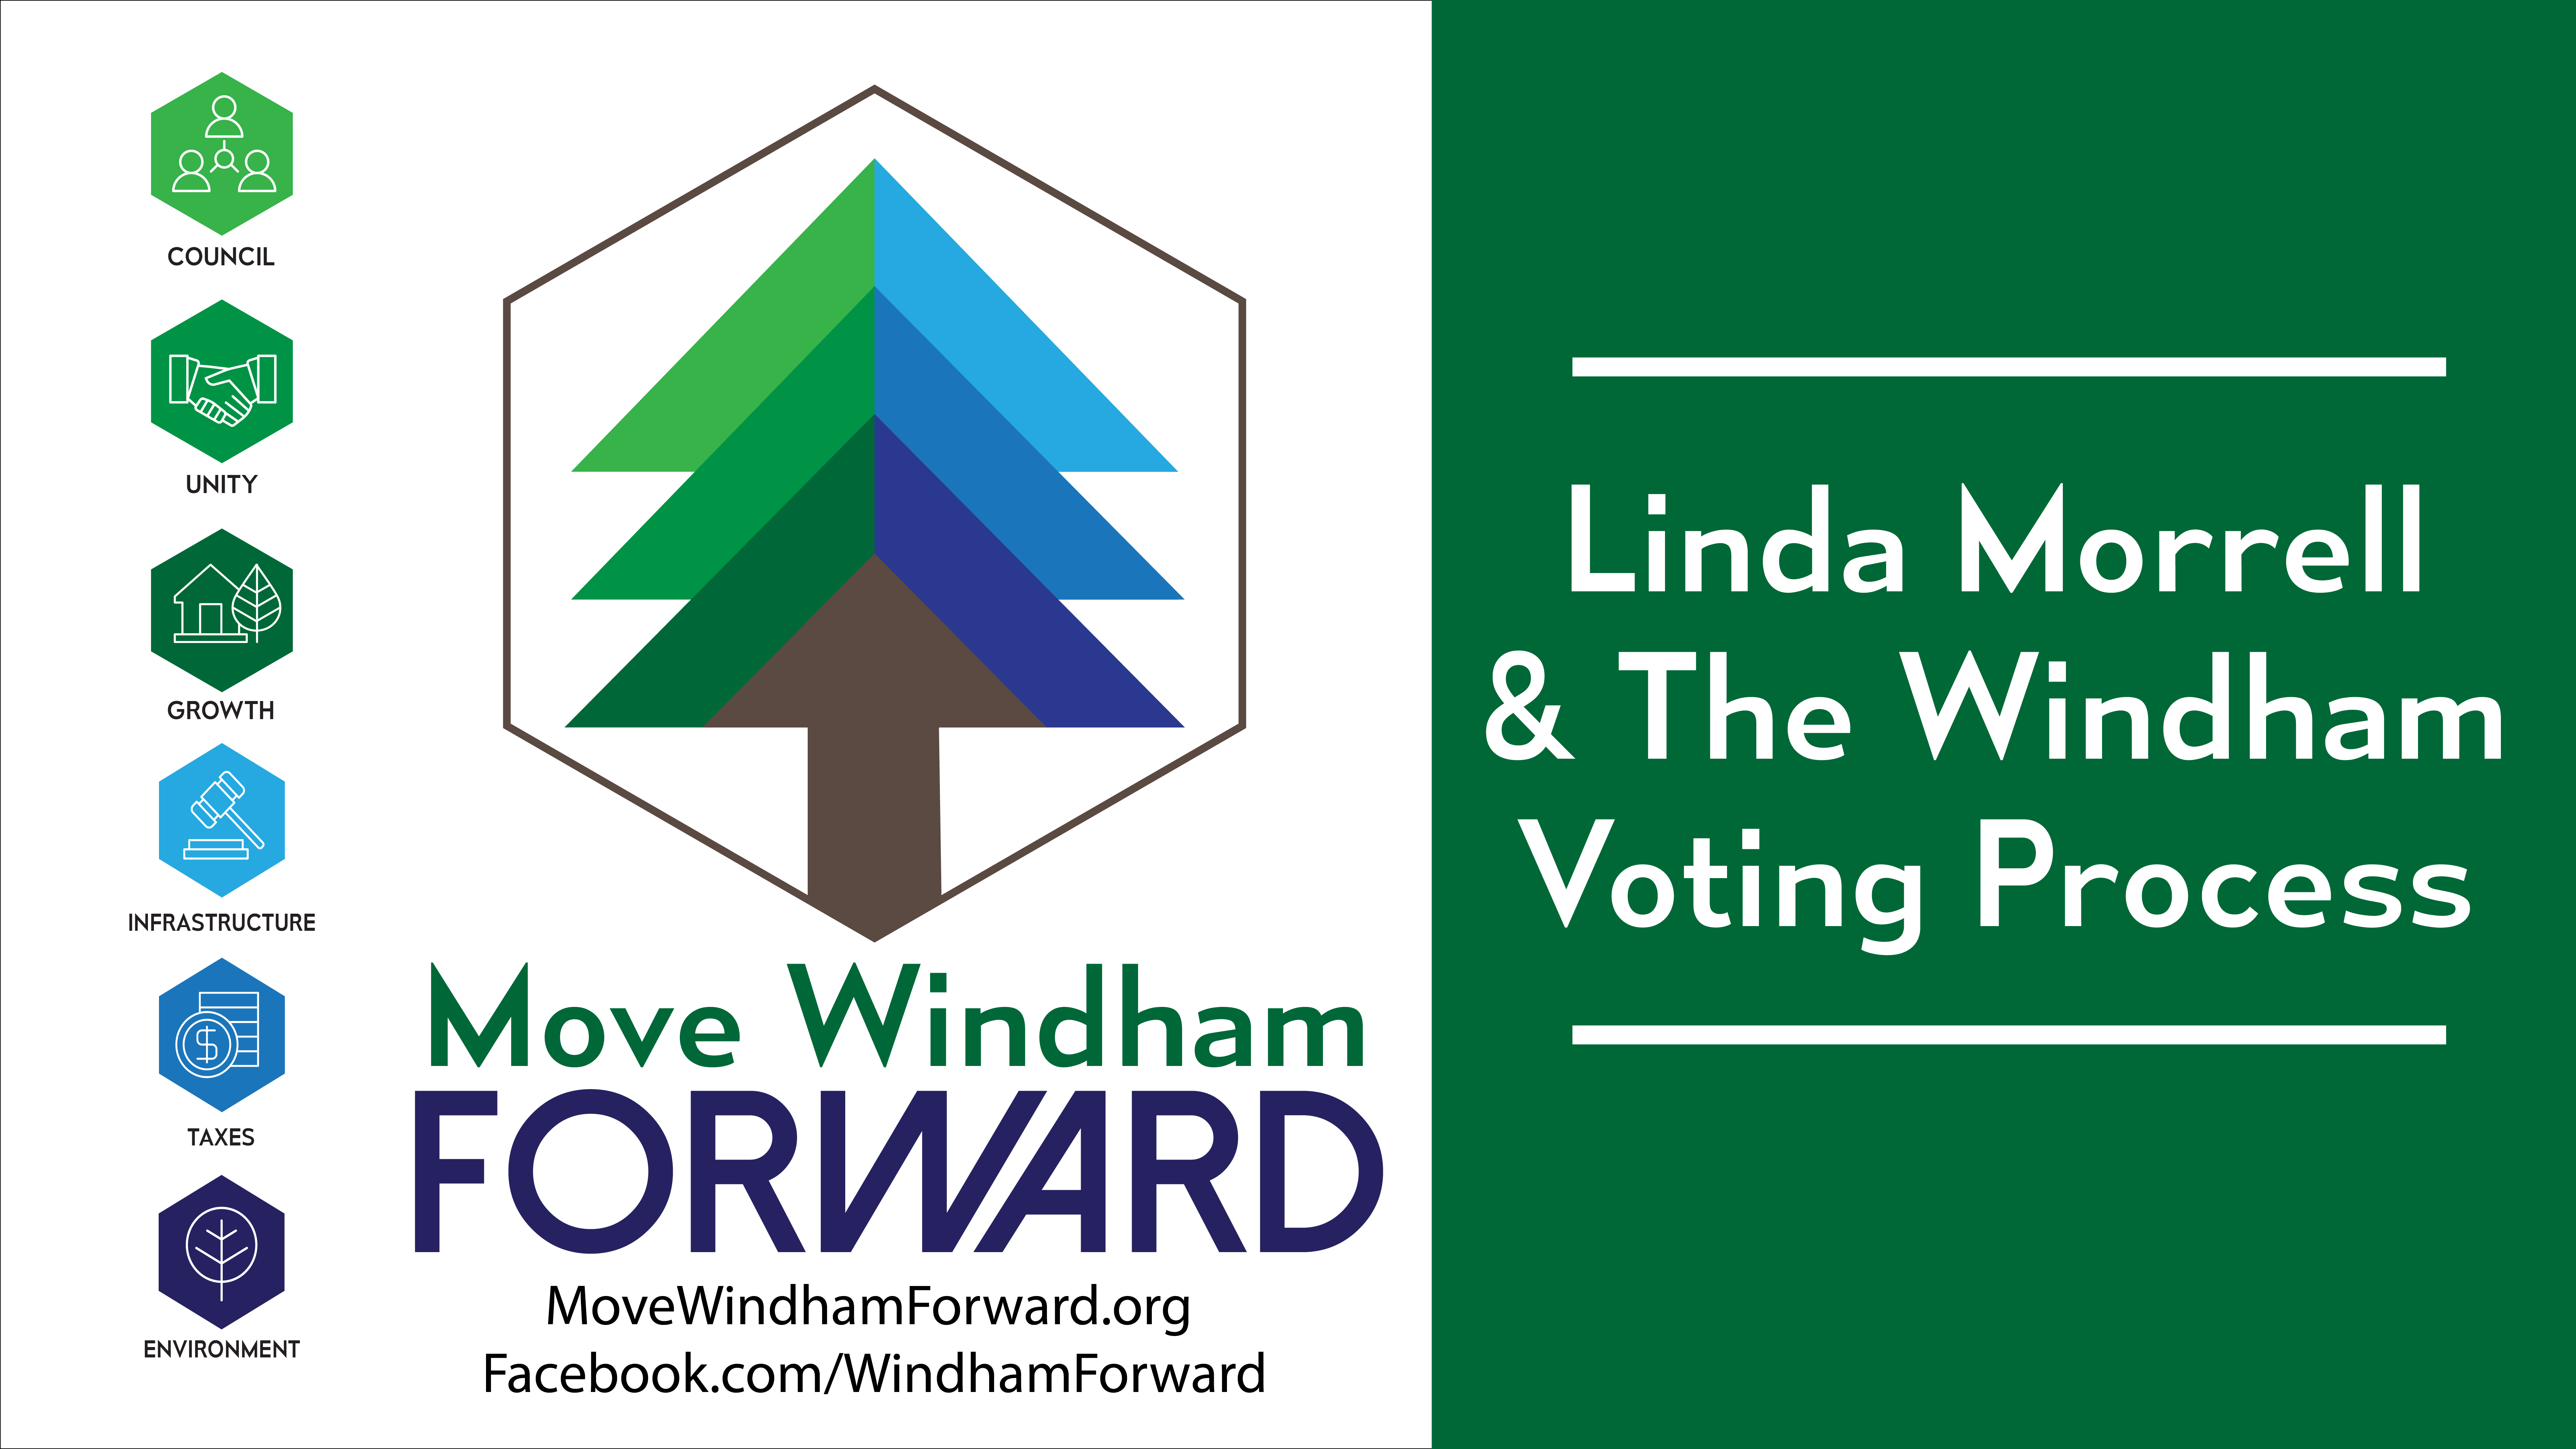 The Move Windham Forward Logo with Text Next to it saying "Linda Morrell and the Windham Voting Process" Learn to Vote in Windham Elections